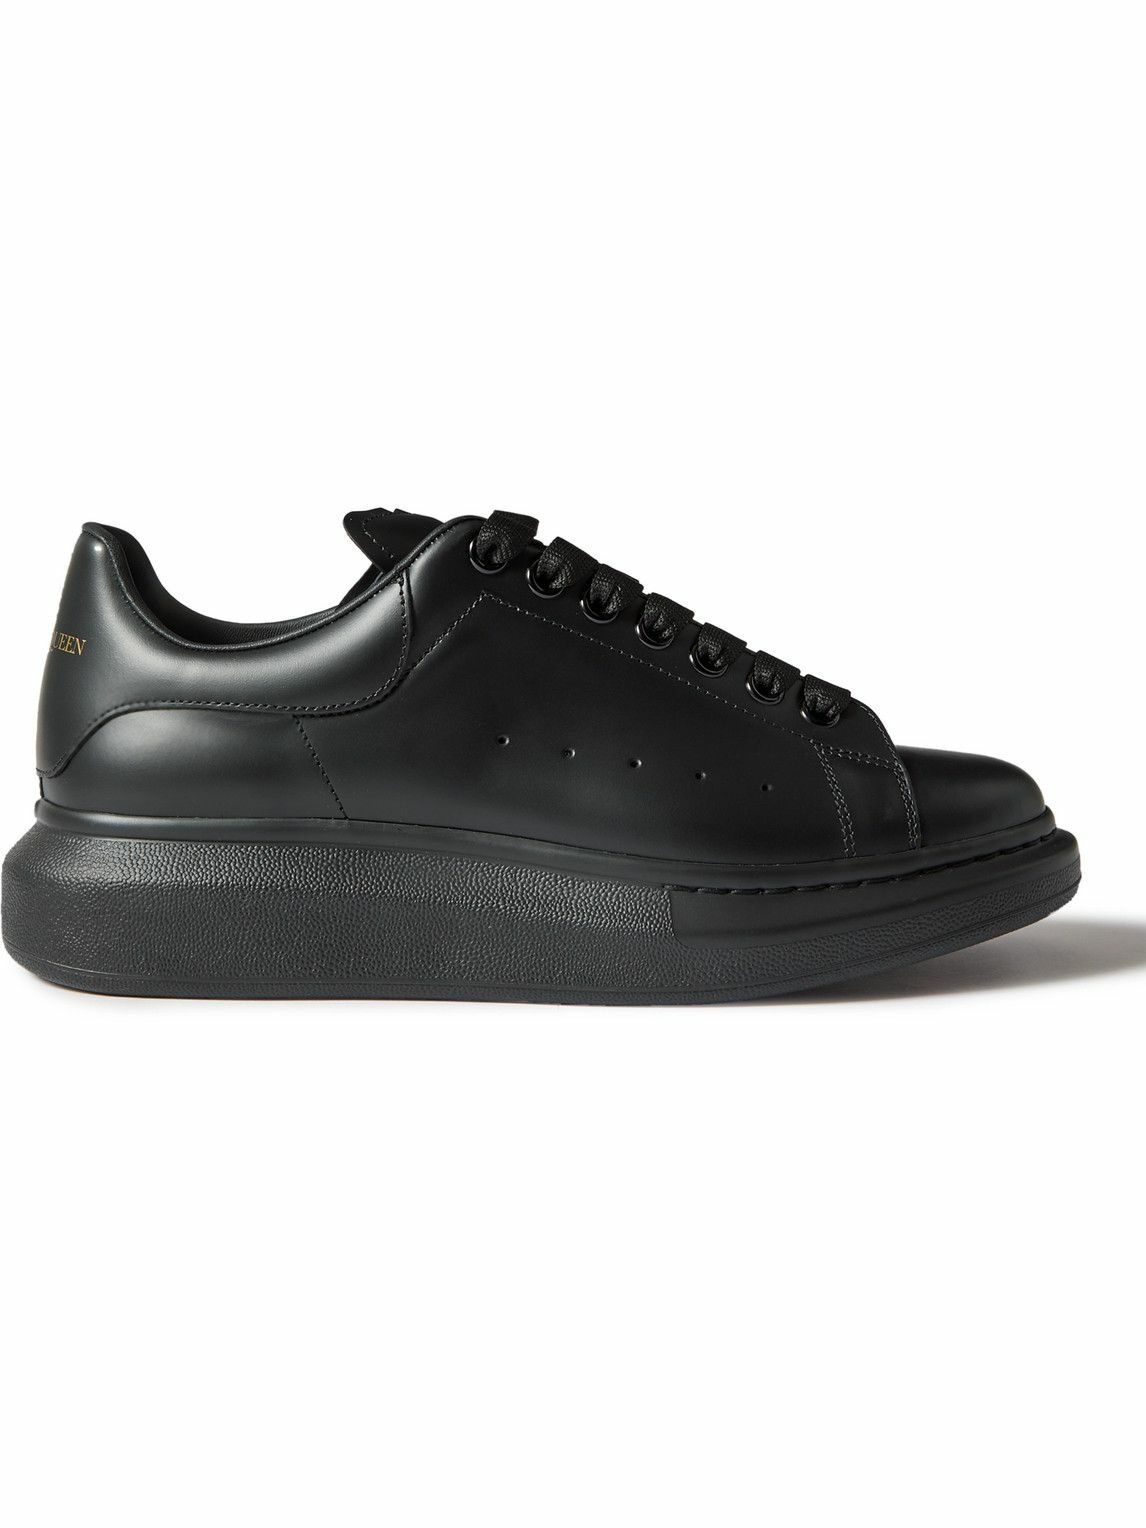 Alexander McQueen - Exaggerated-Sole Studded Leather Sneakers - Black ...